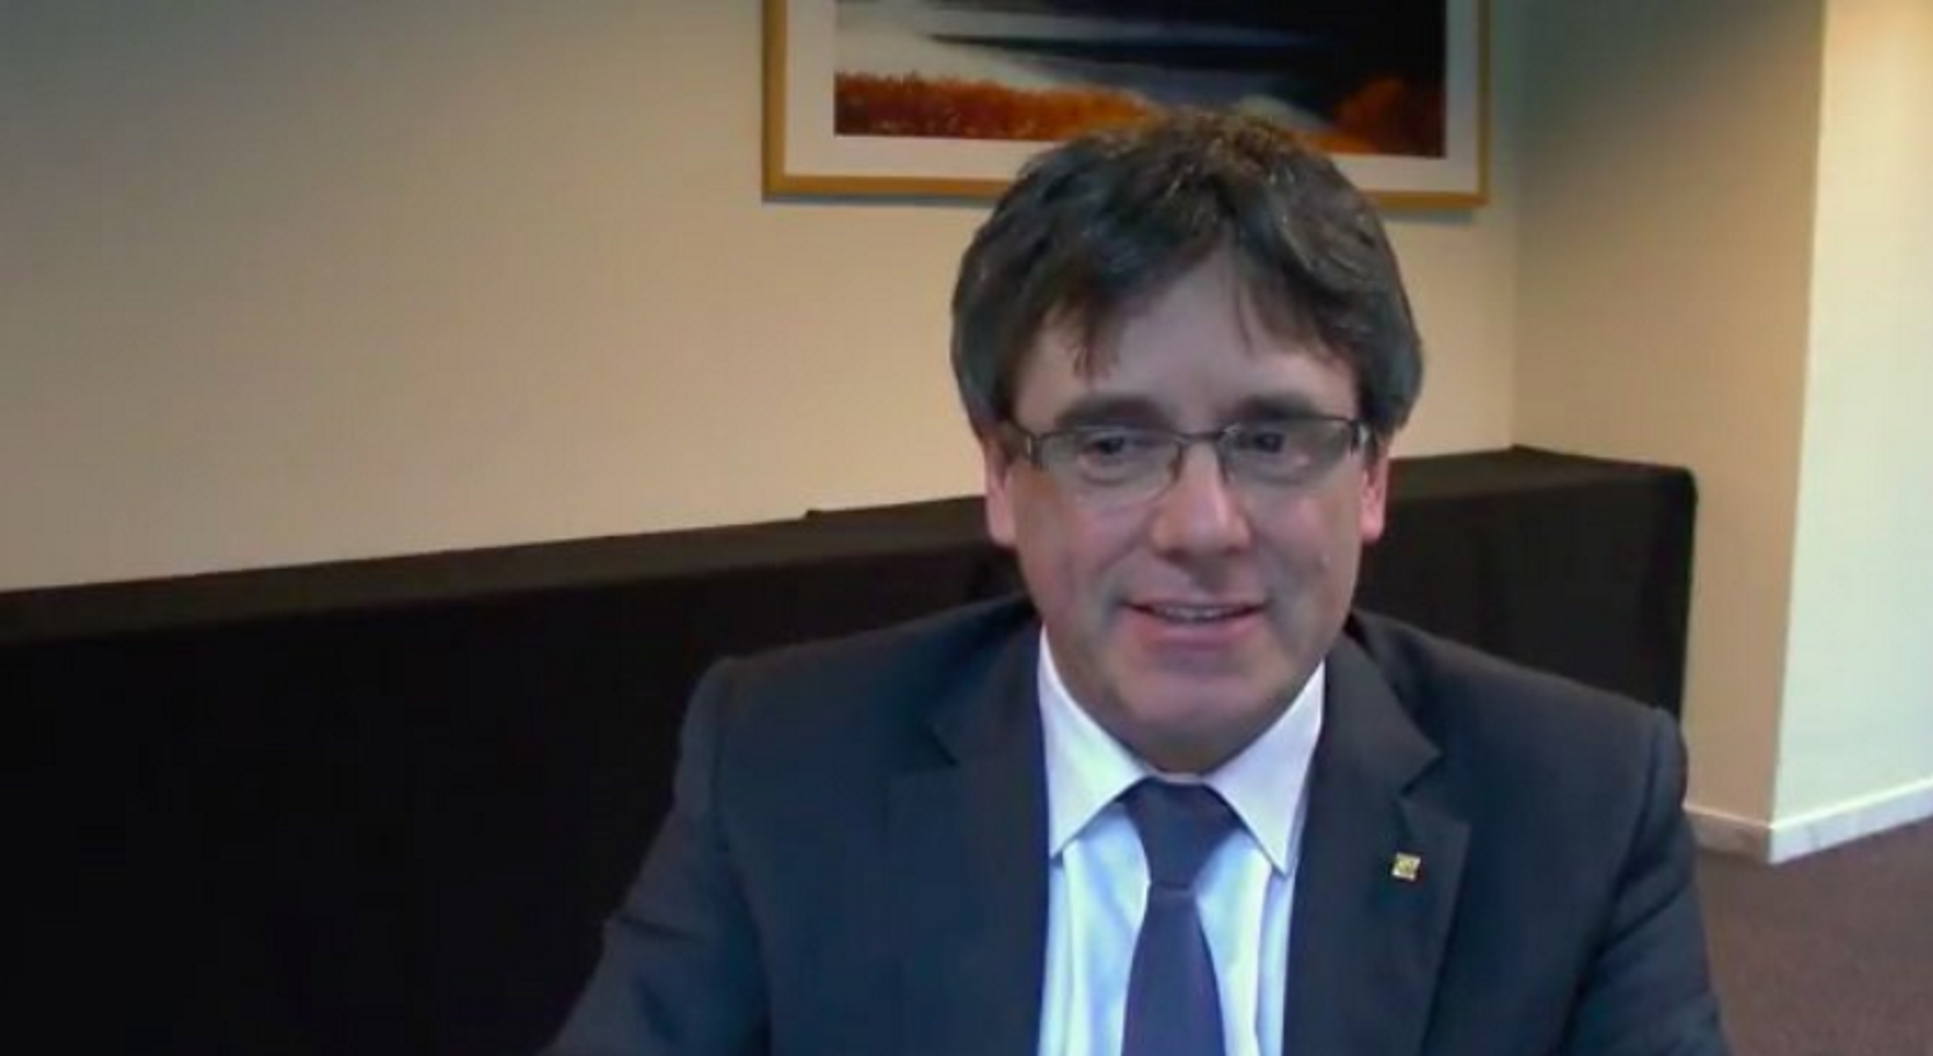 Puigdemont calls on EU member states to ensure Catalan election result is respected